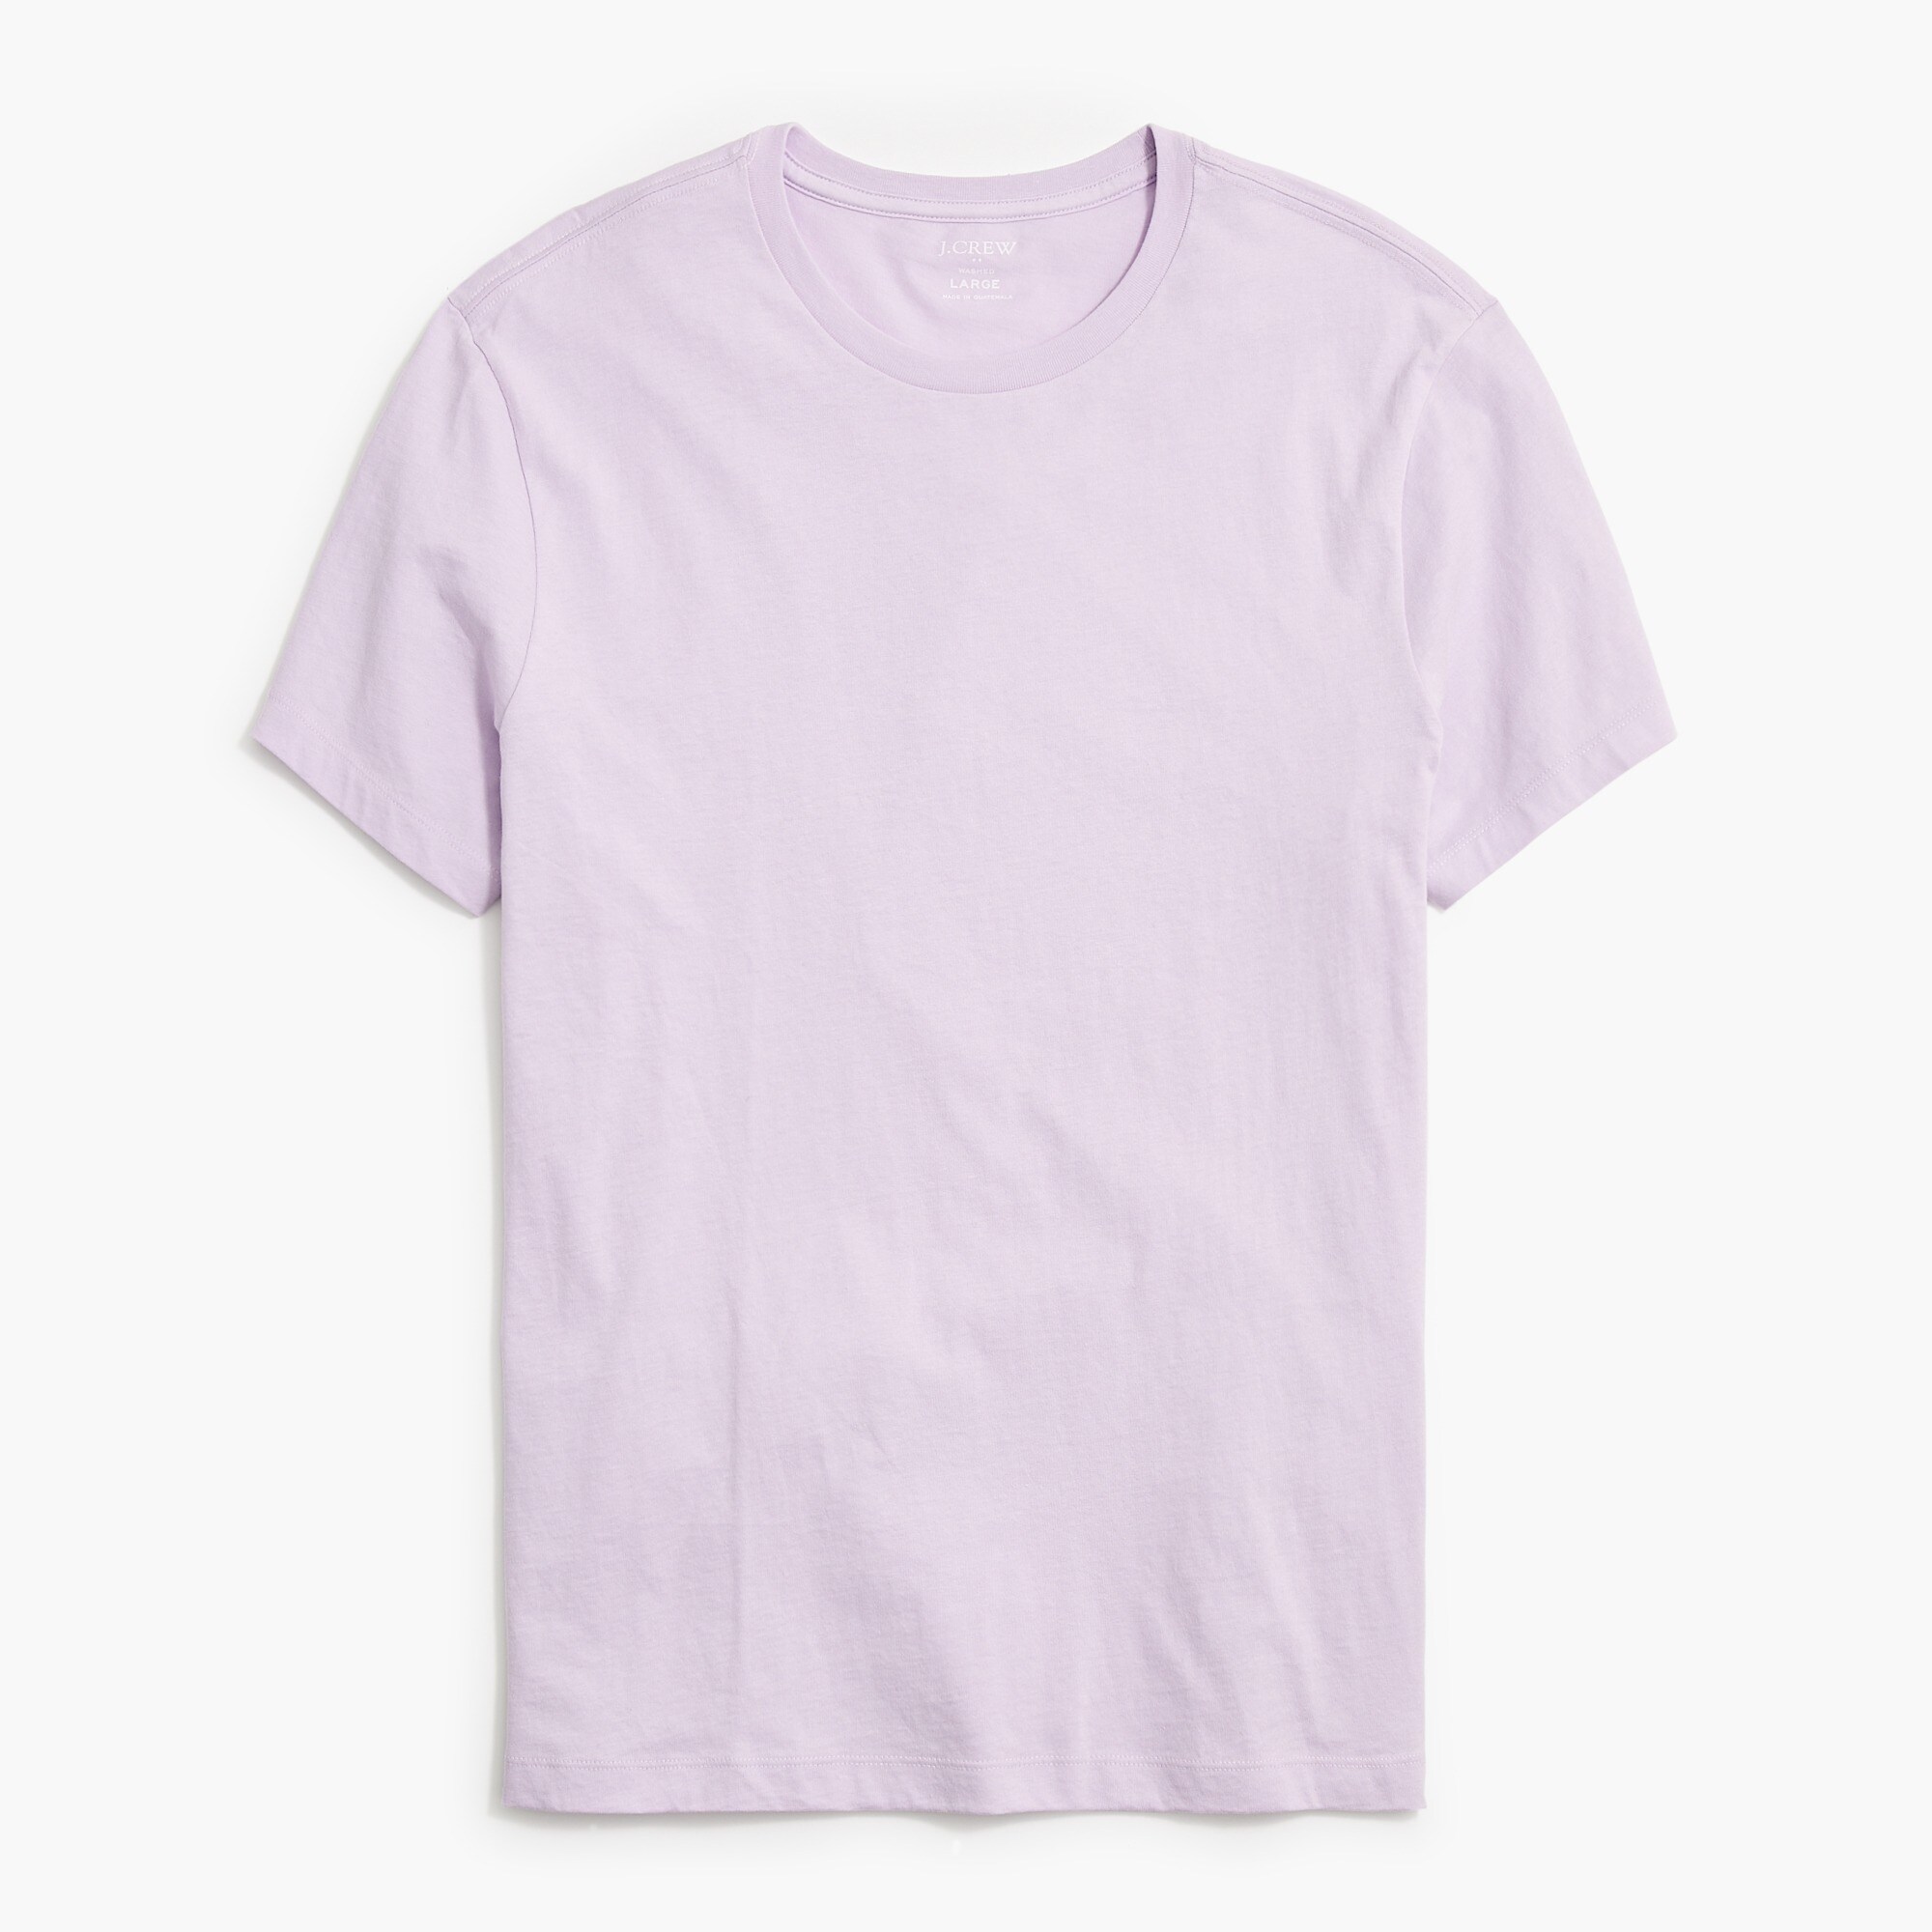  Cotton washed jersey tee